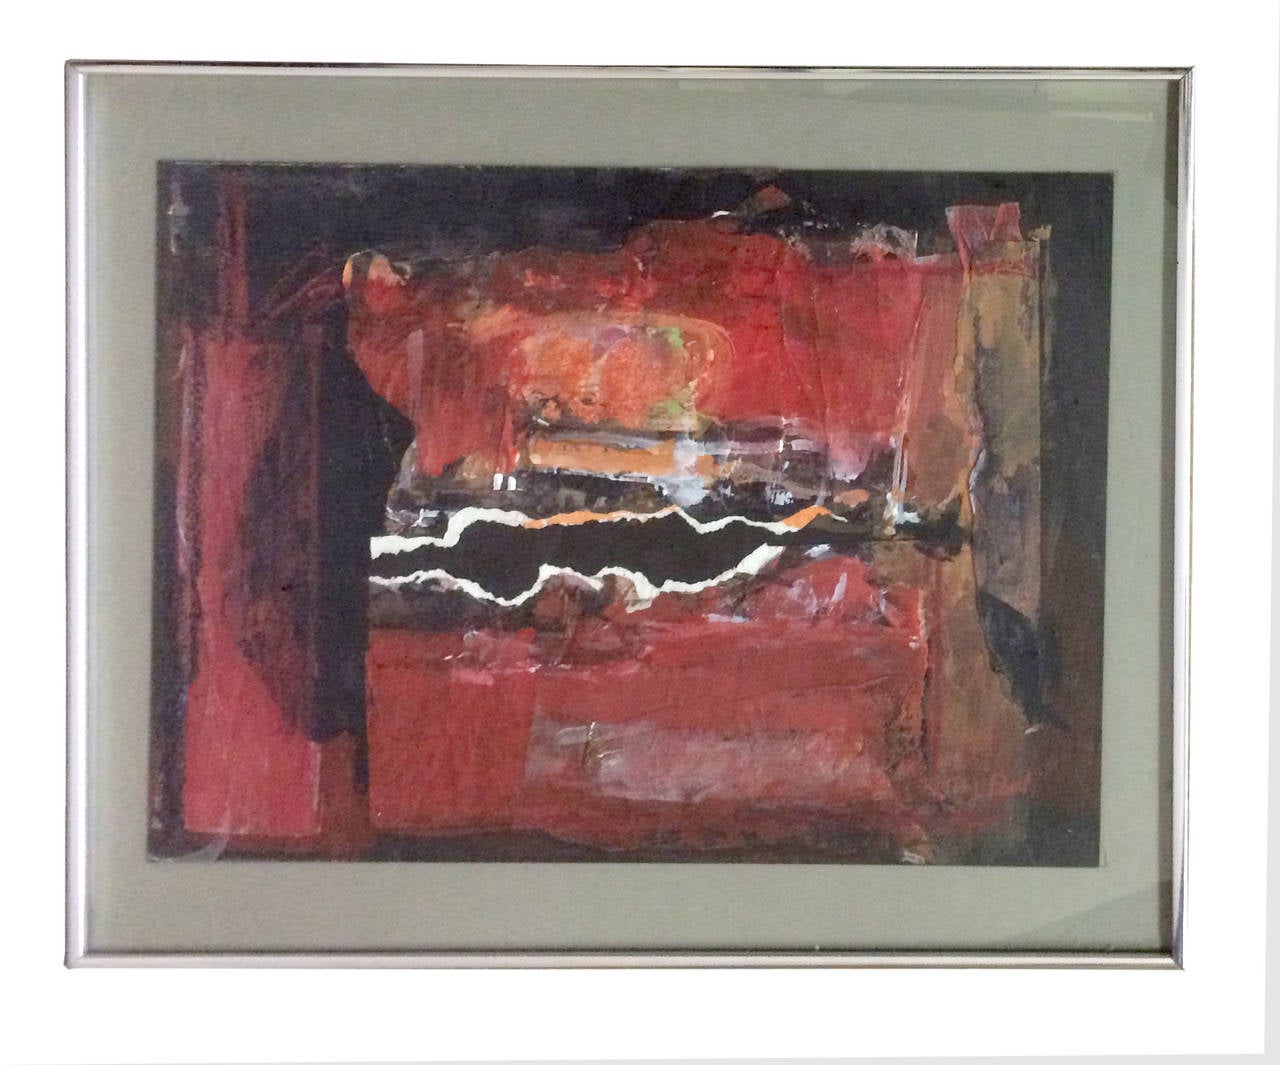 This mixed media collage is created from layer upon layer of paper glued together and painted over with red oil paint. Signed in the lower right corner, 